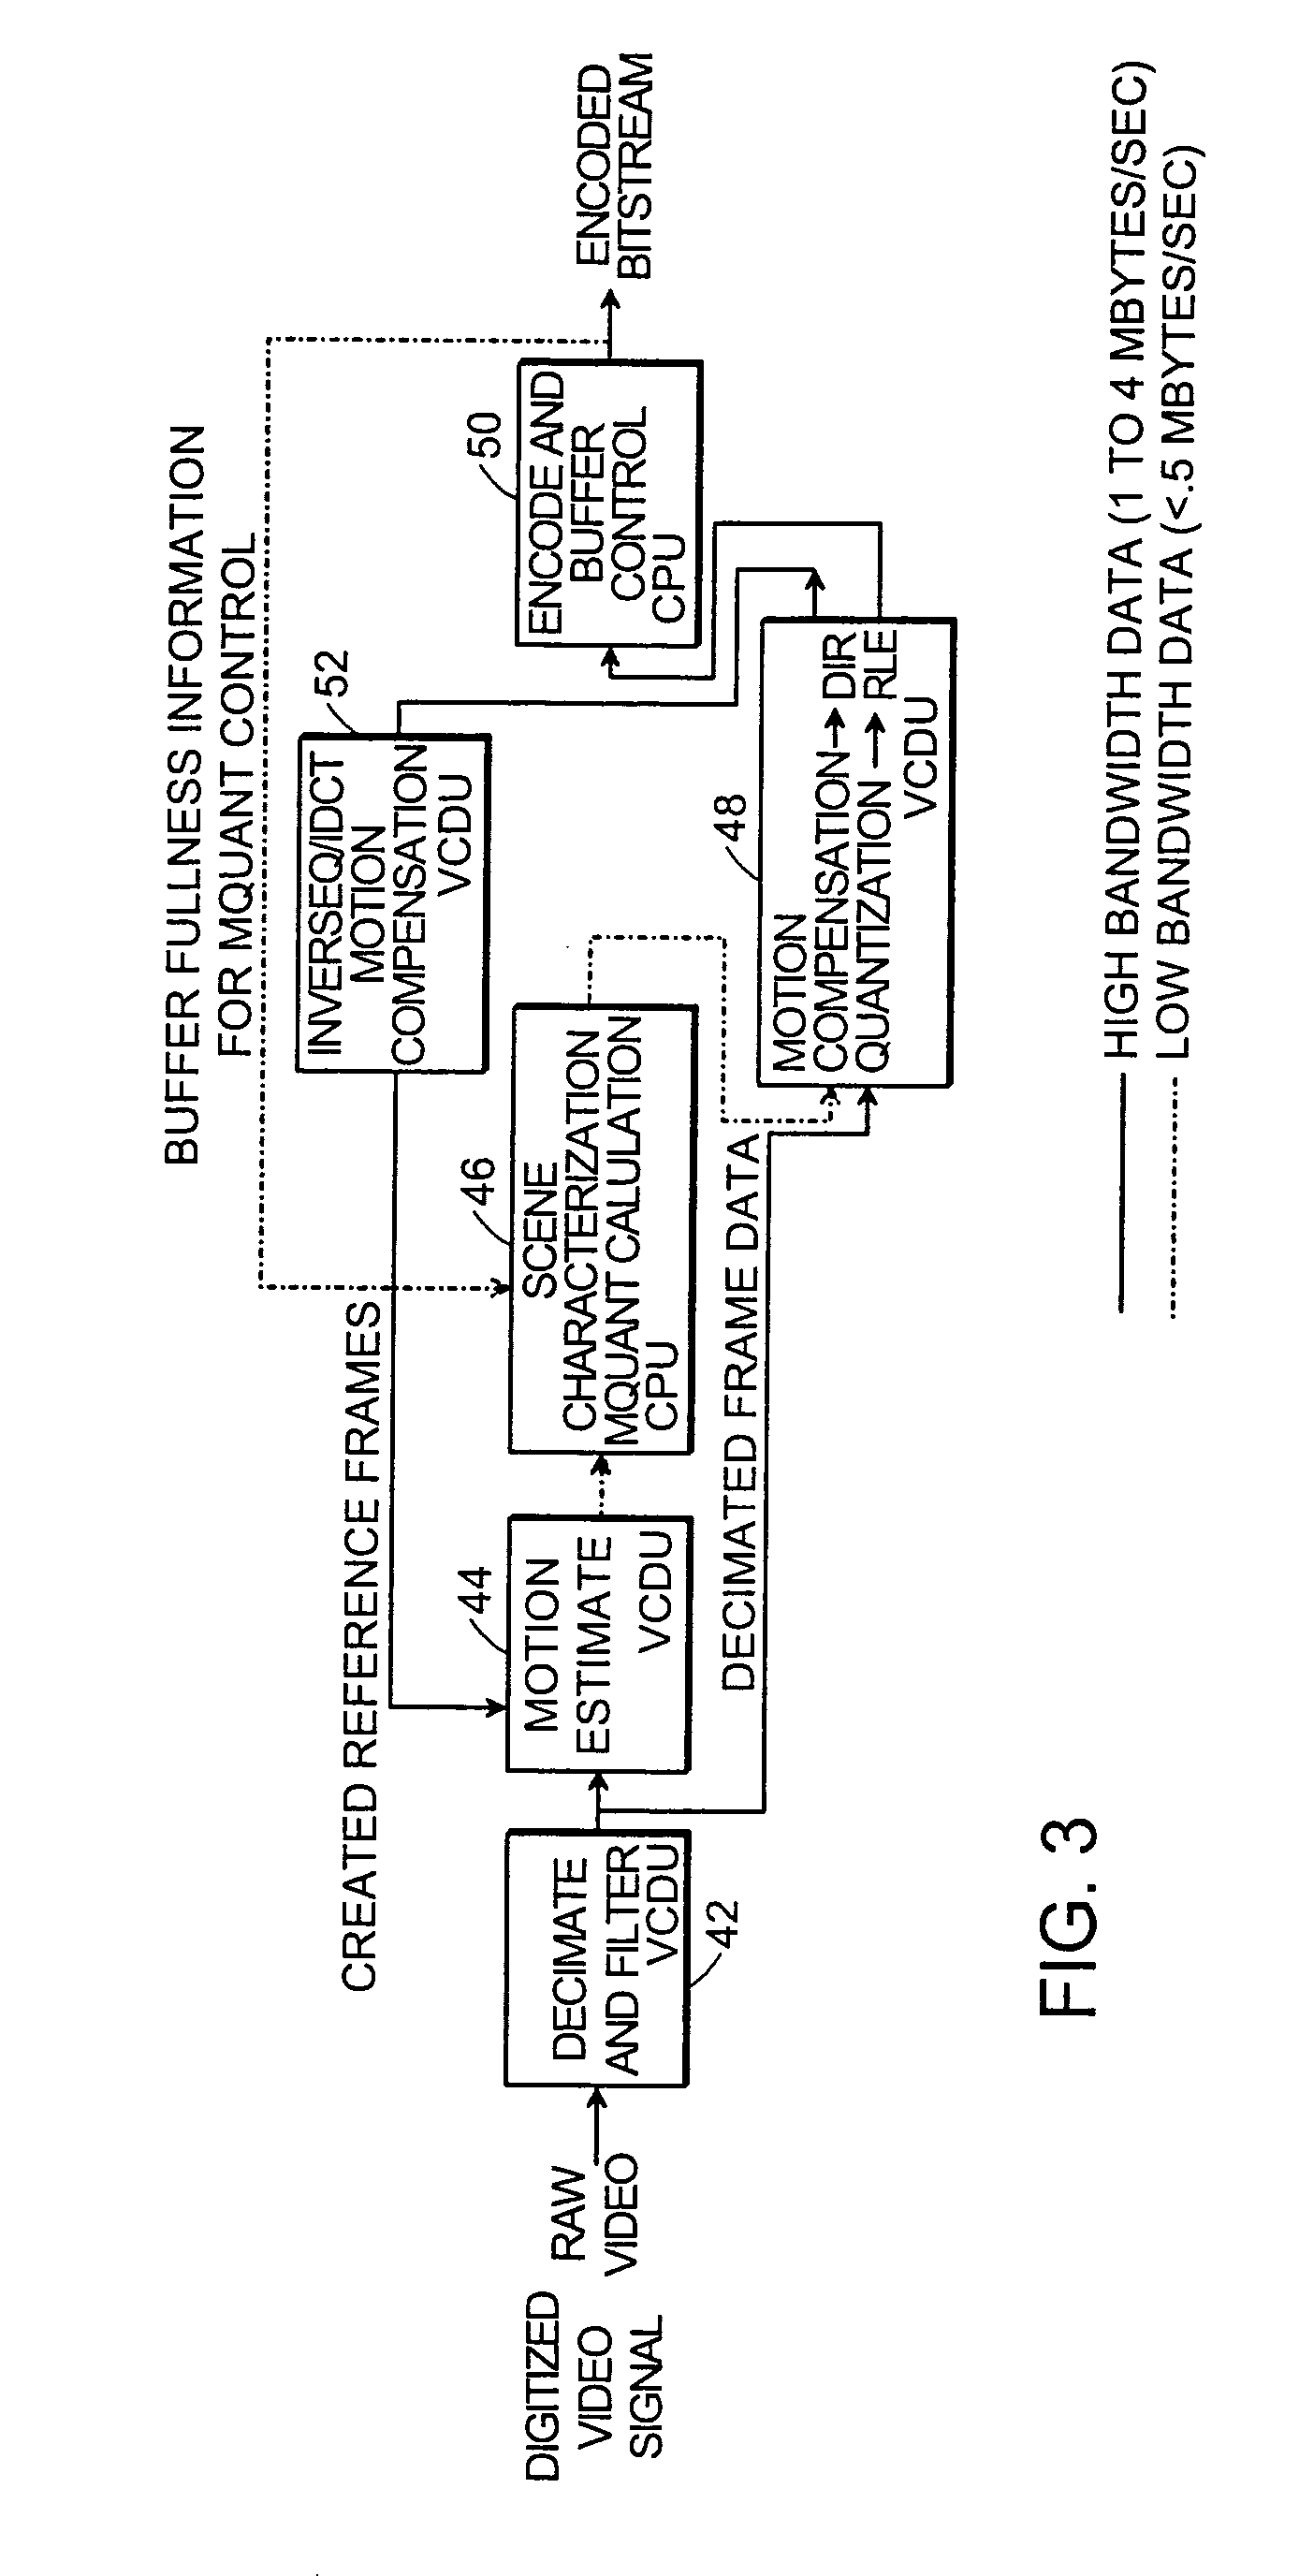 Method and apparatus for compressing a video image